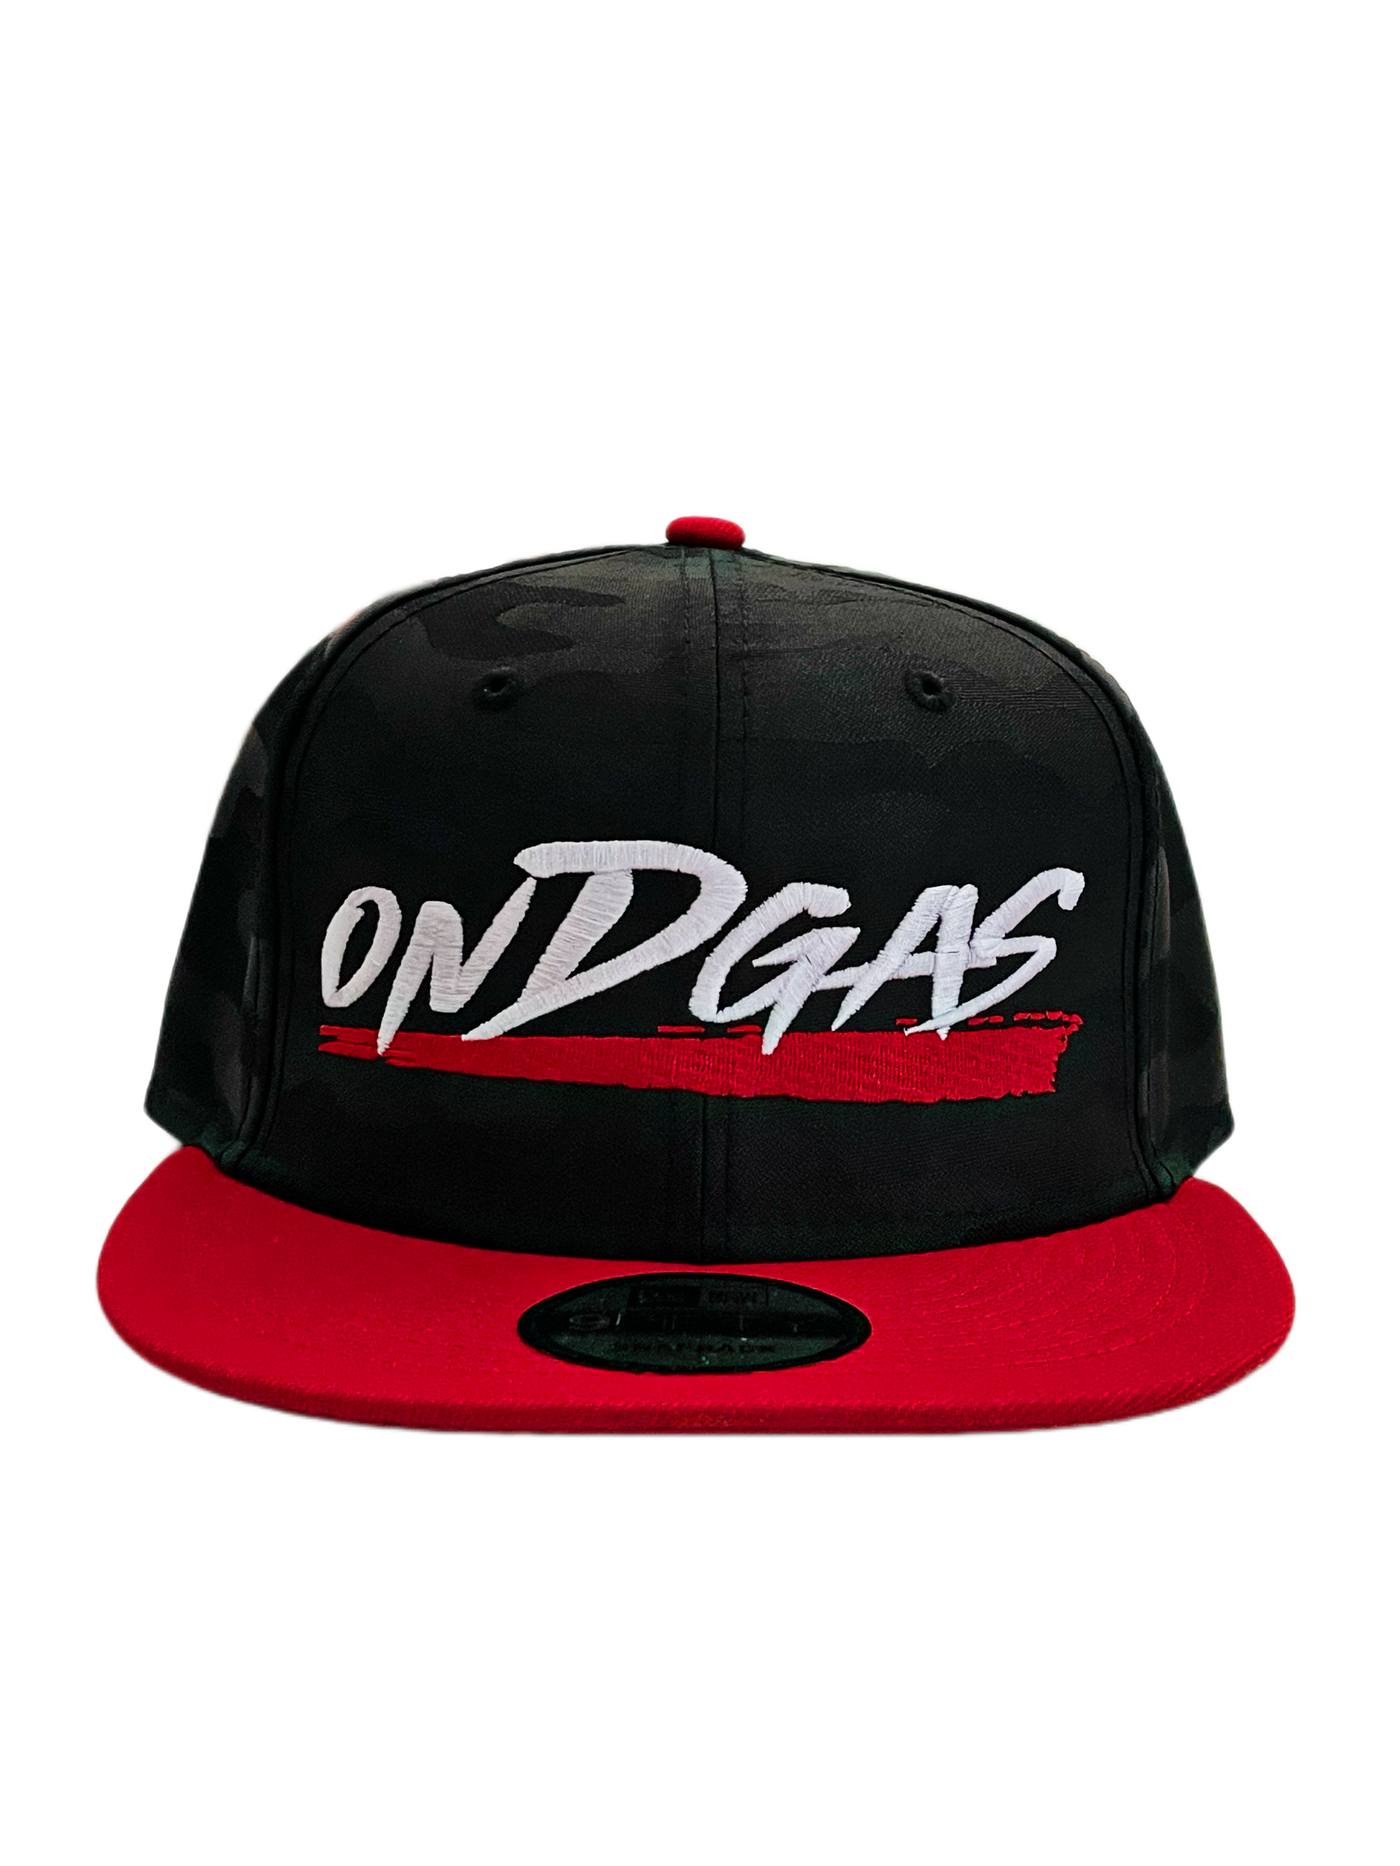 Black and Red CAMO ONDGAS Snapback hat